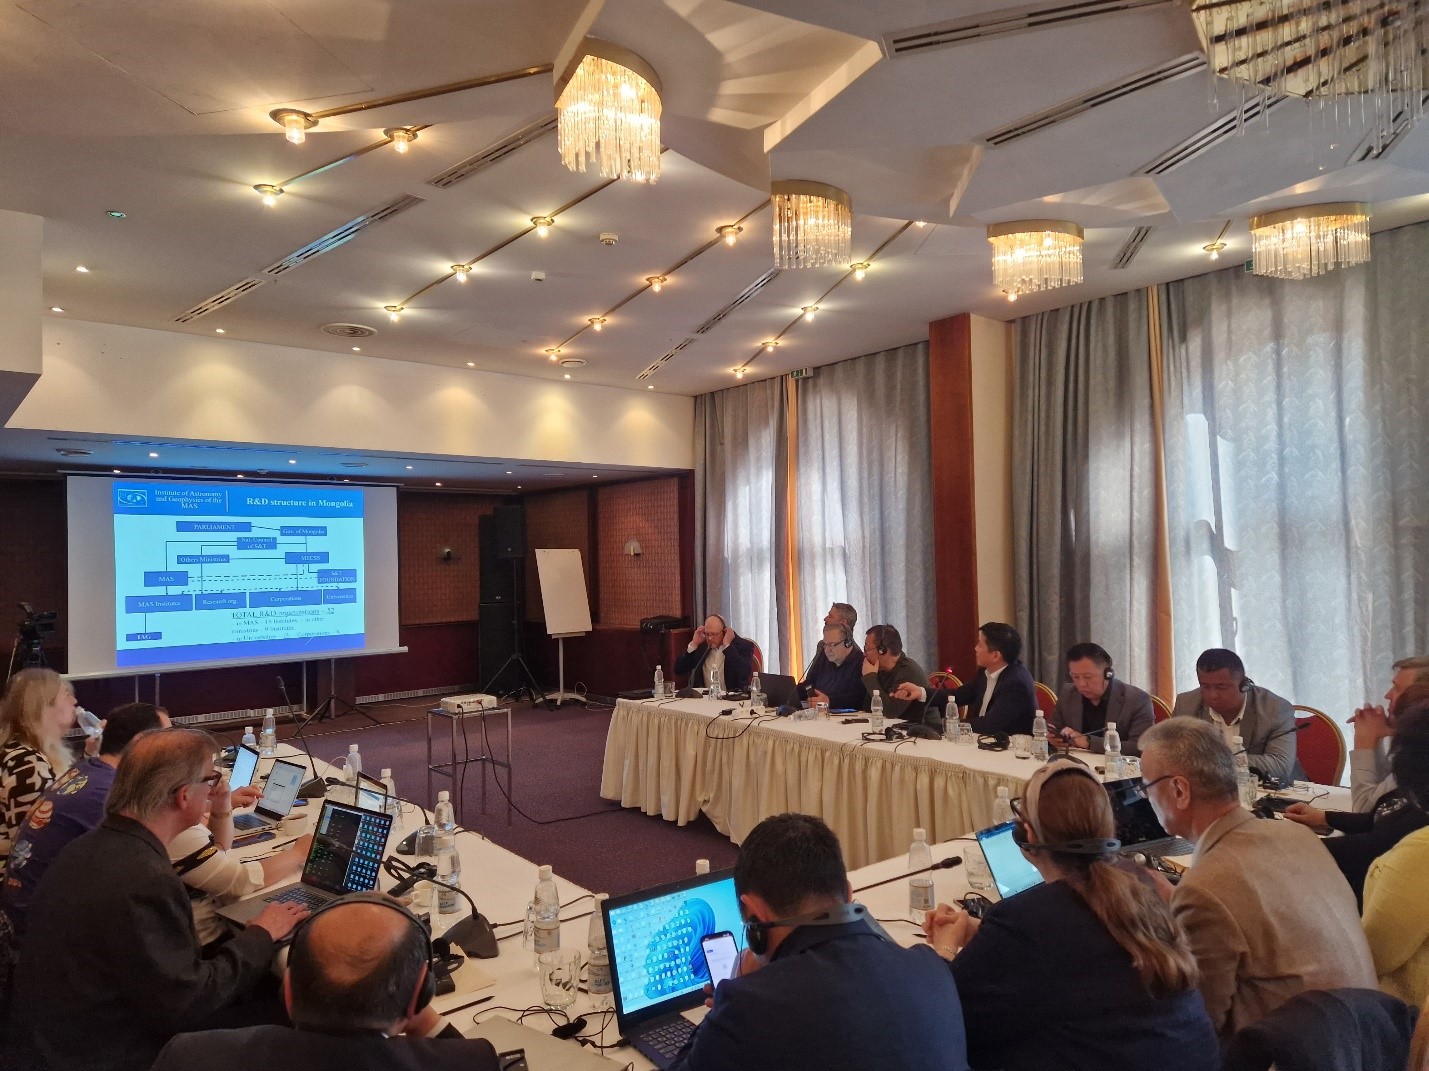 The Workshop ‘Seismic Calibration Experiments in Eurasia – Past, Present, and Future” was held in Almaty on 28-29 March, 2023.